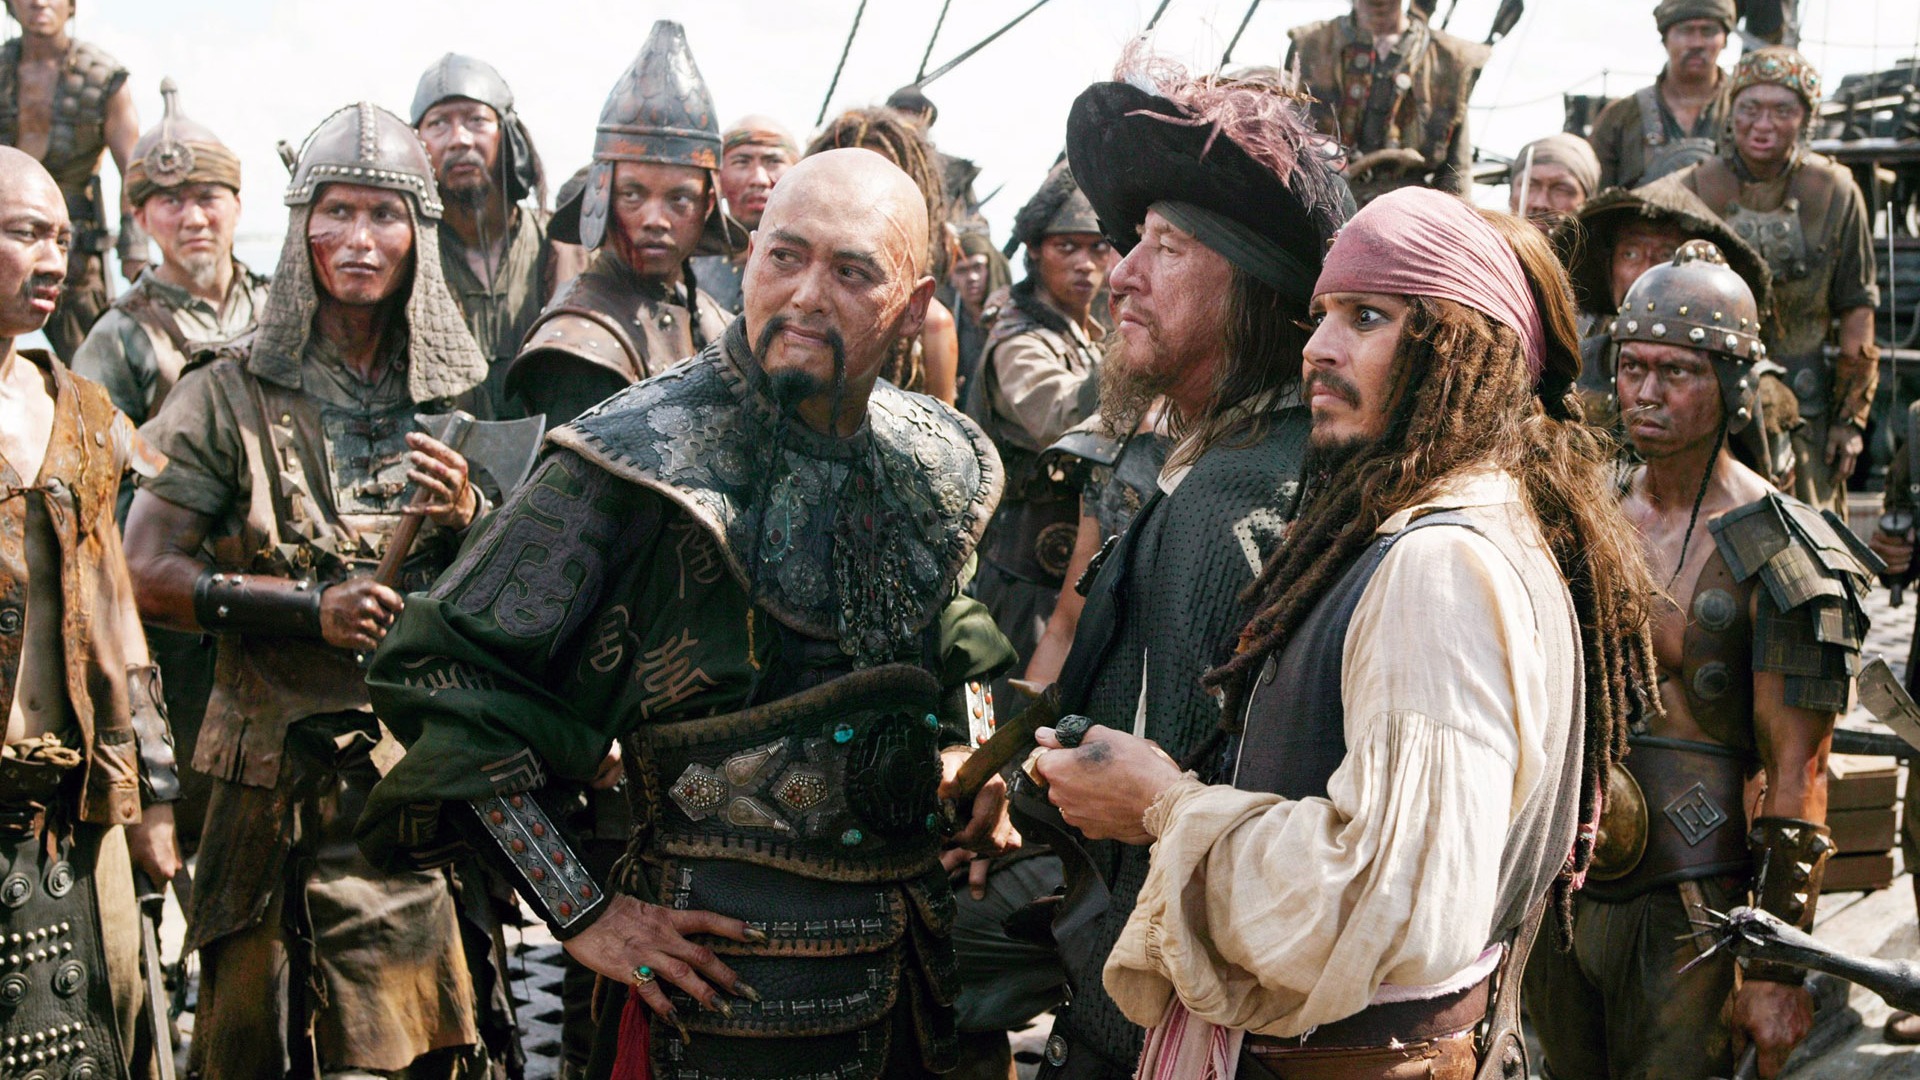 Pirates of the Caribbean 3 HD Wallpapers #6 - 1920x1080